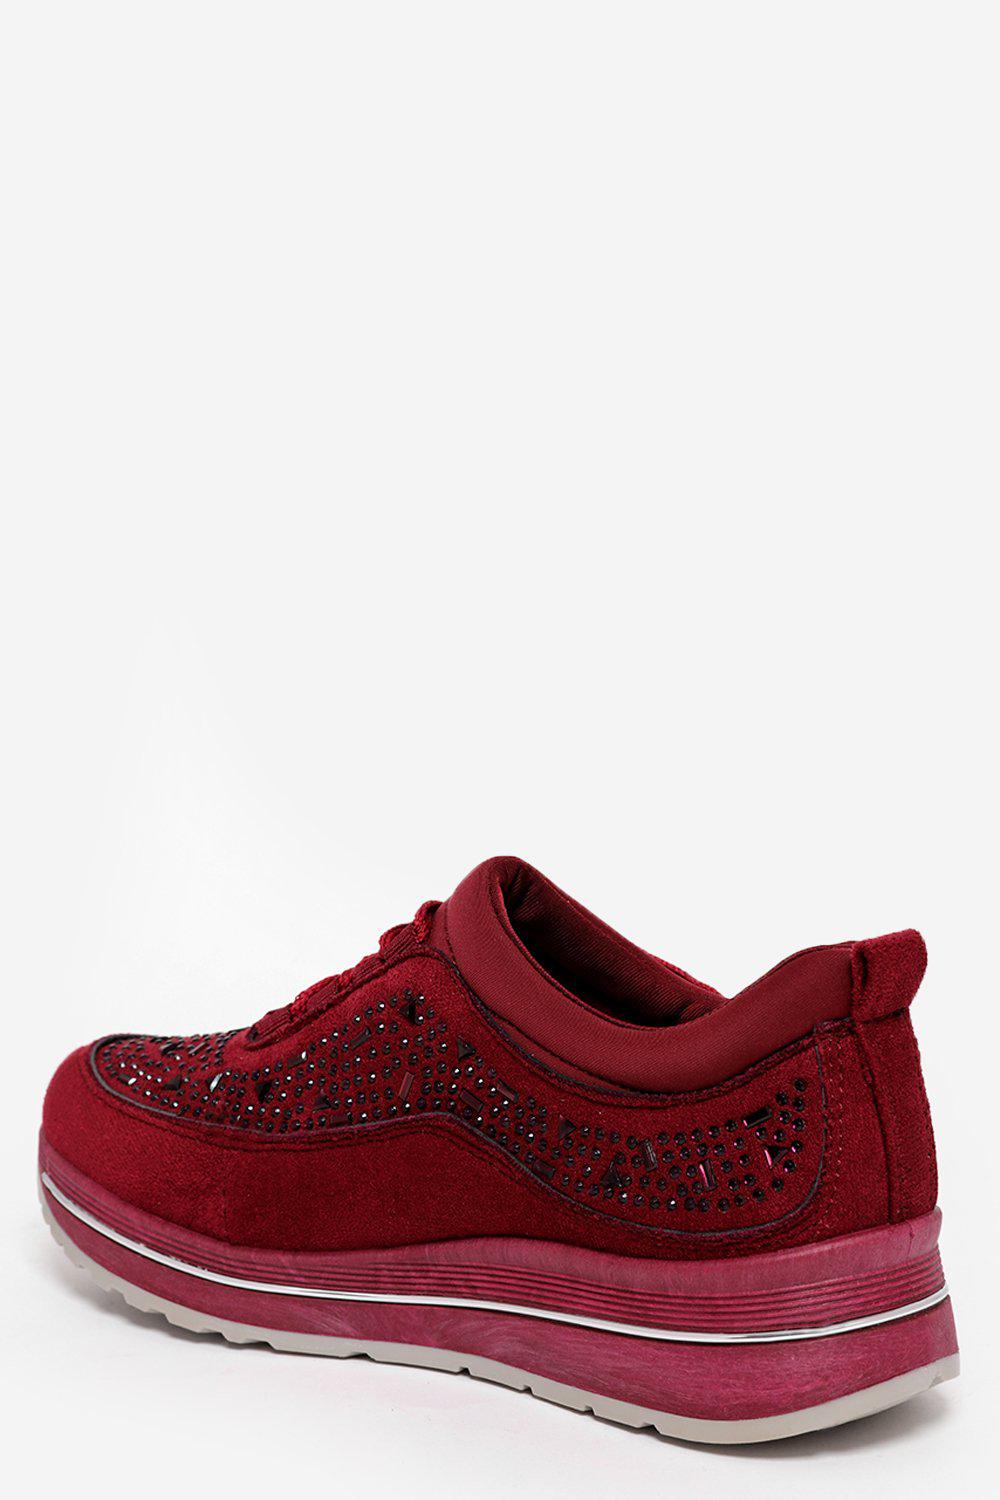 Get Crystals Embellished Maroon Trainers for only £5.00 exclusively at ...